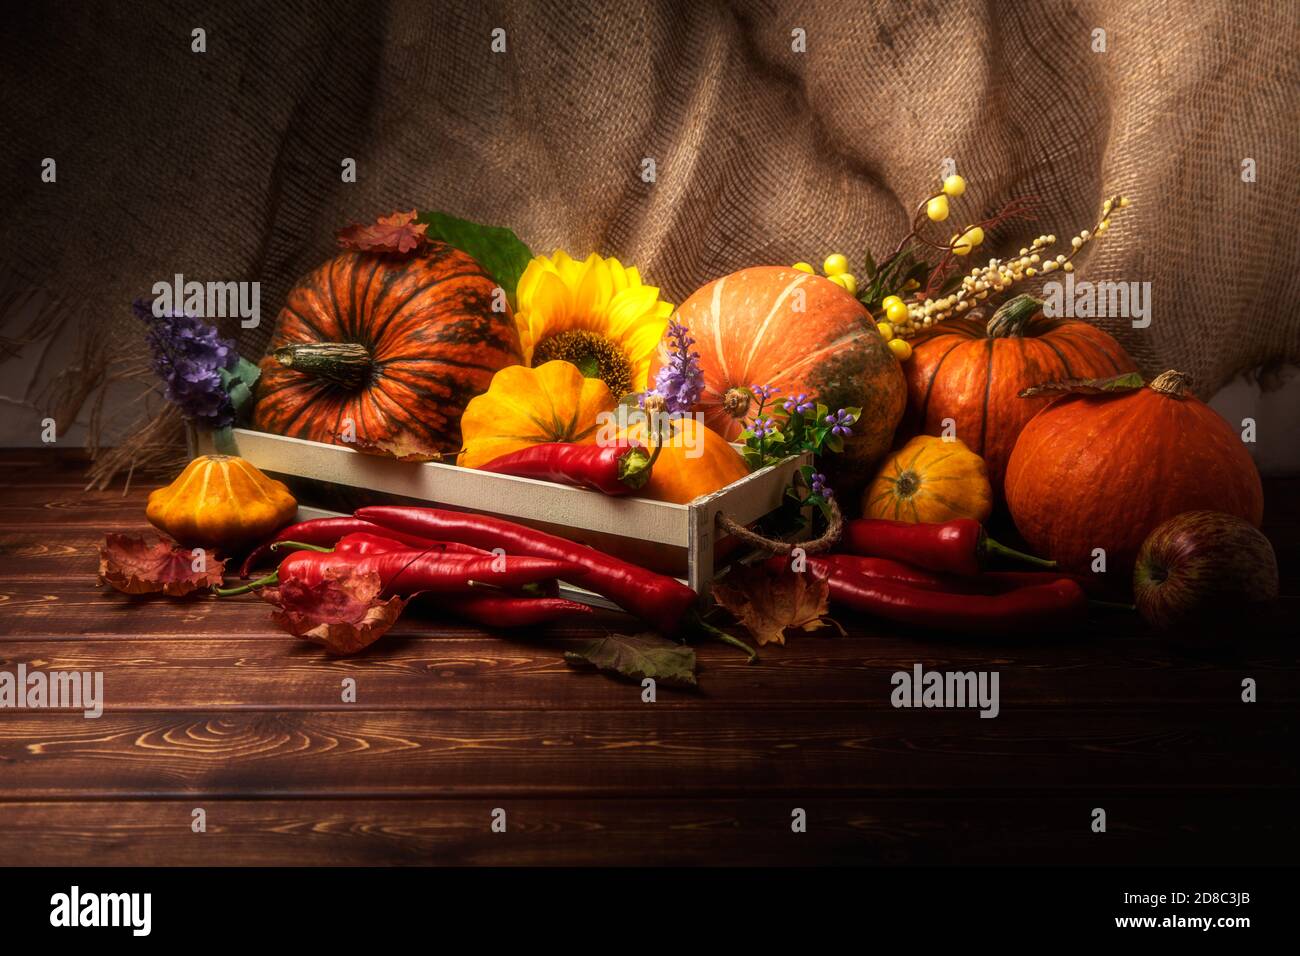 Rustic fall table centerpiece with flowers, pumpkins, red hot chili peppers, green apples, autumn leaves, copy space Stock Photo